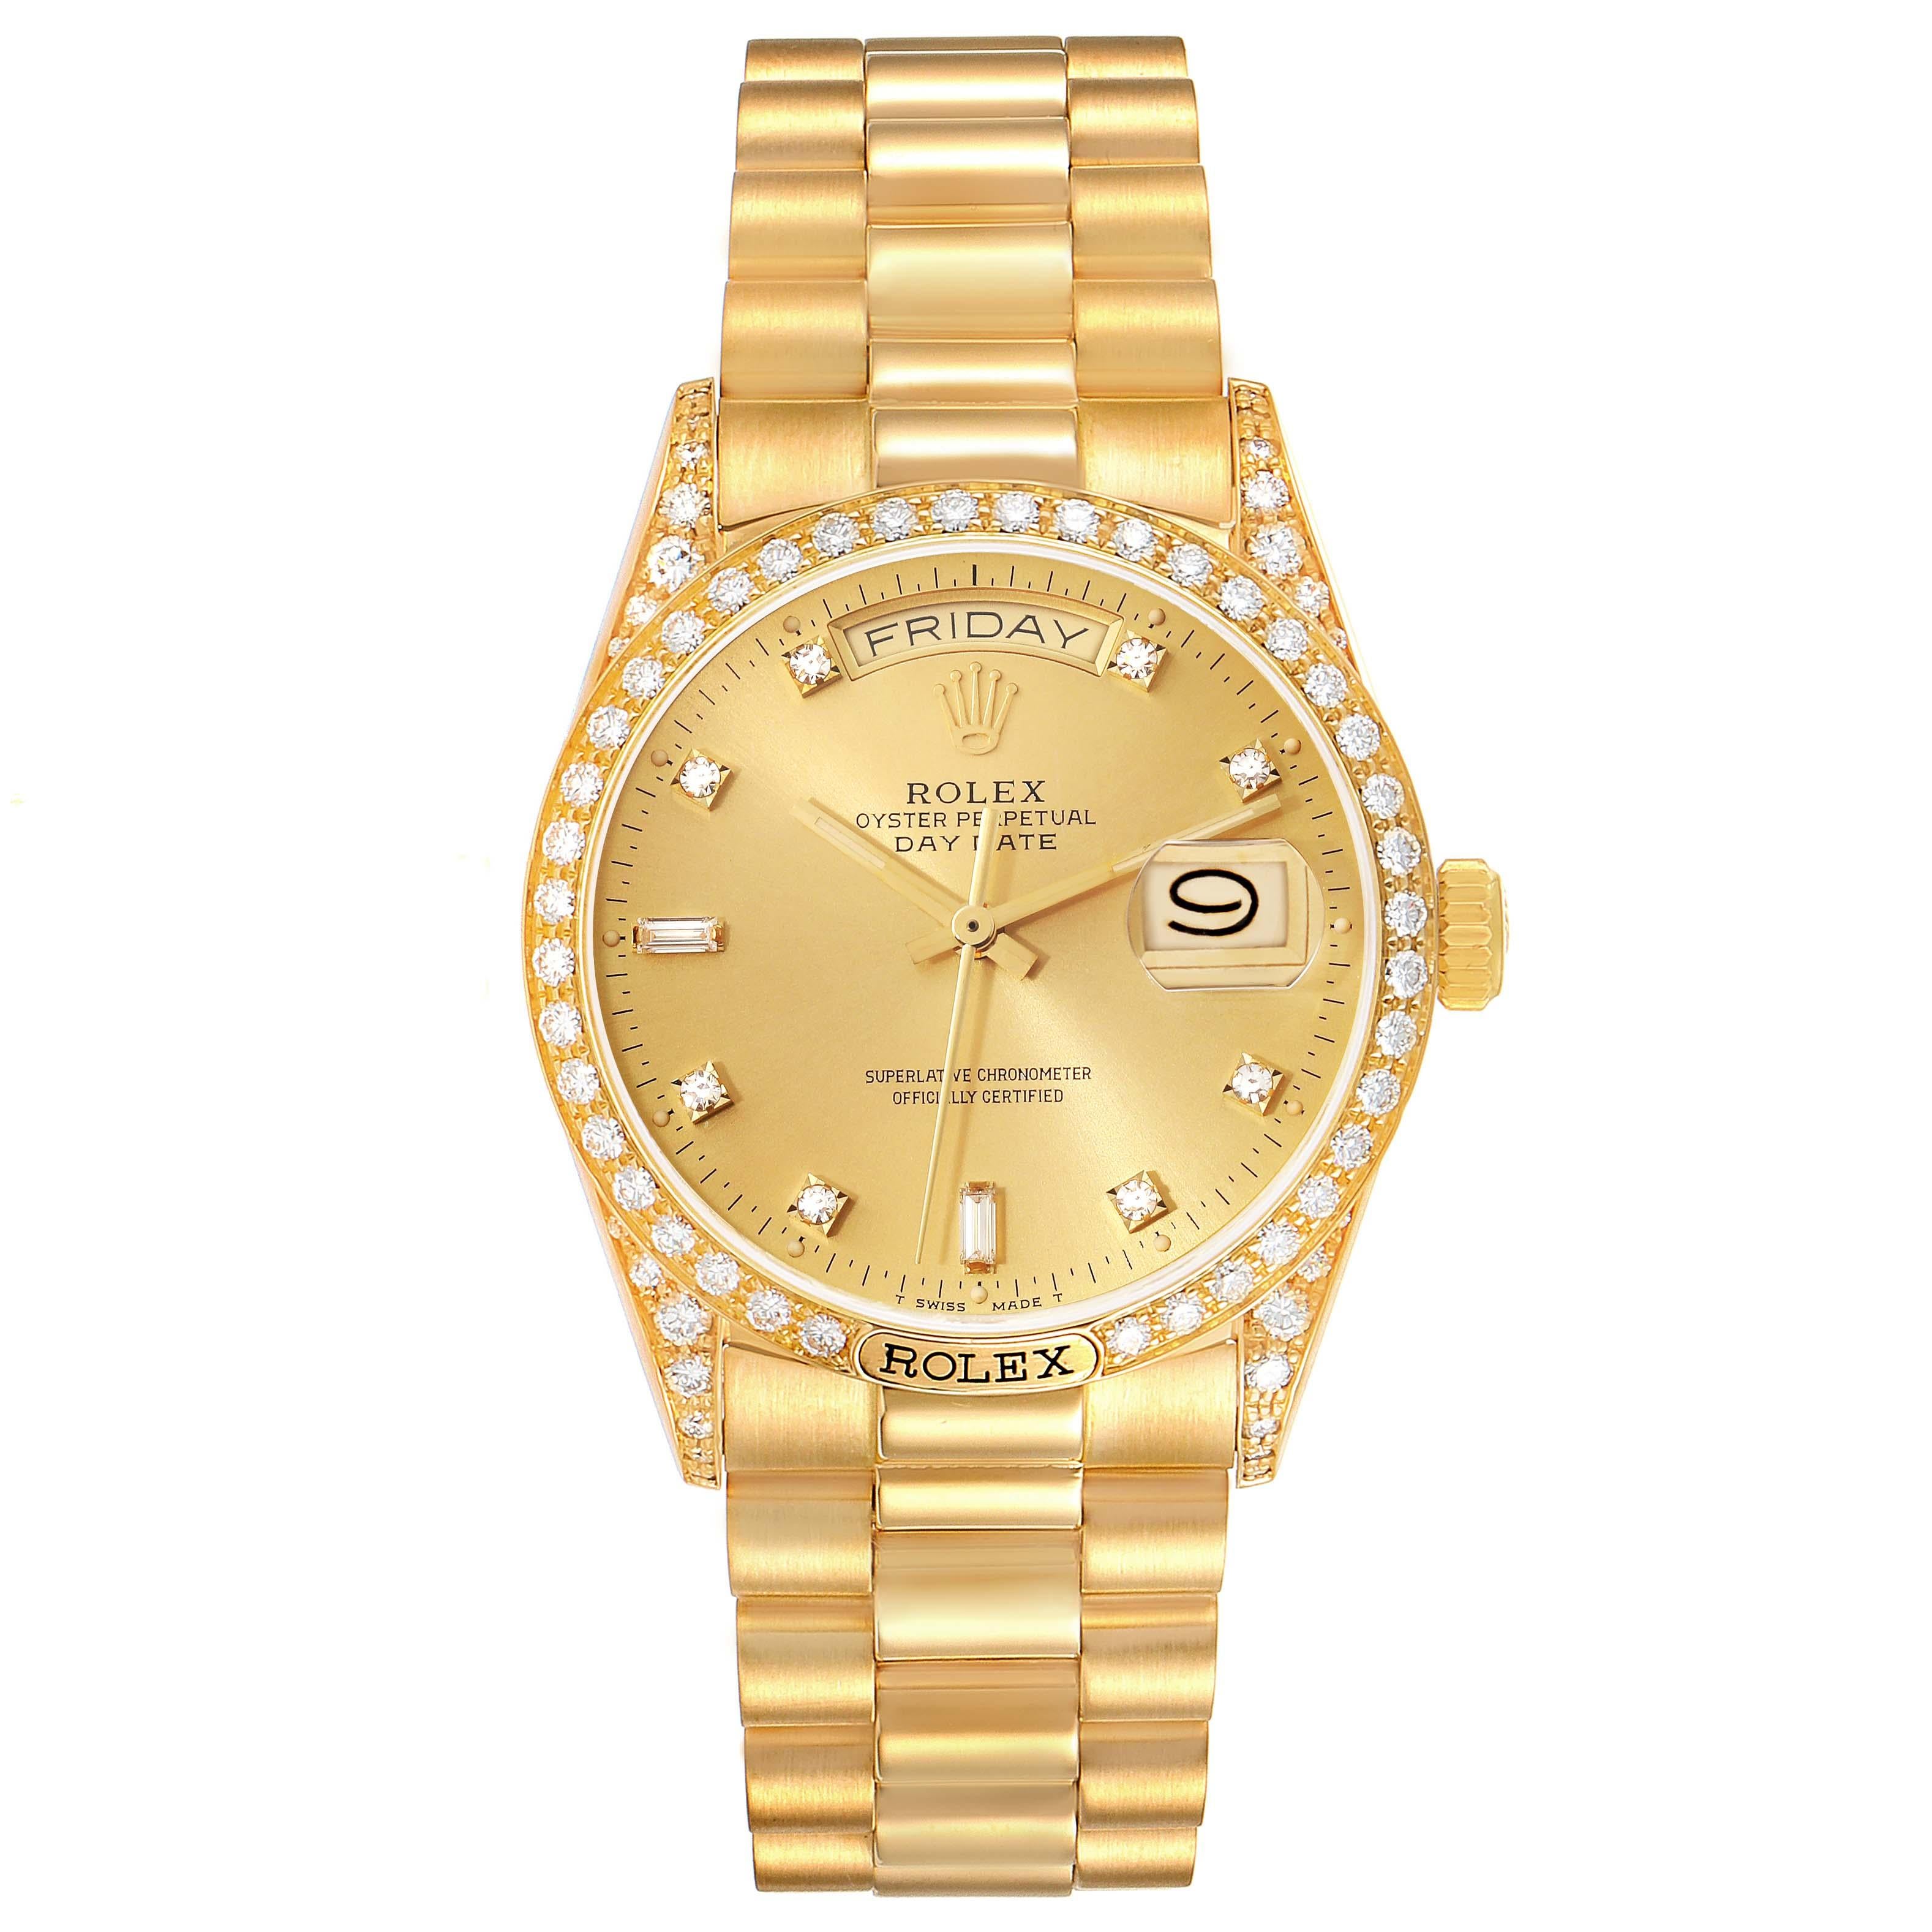 Rolex President Day-Date Yellow Gold Diamond Mens Watch 18138 In Excellent Condition For Sale In Atlanta, GA